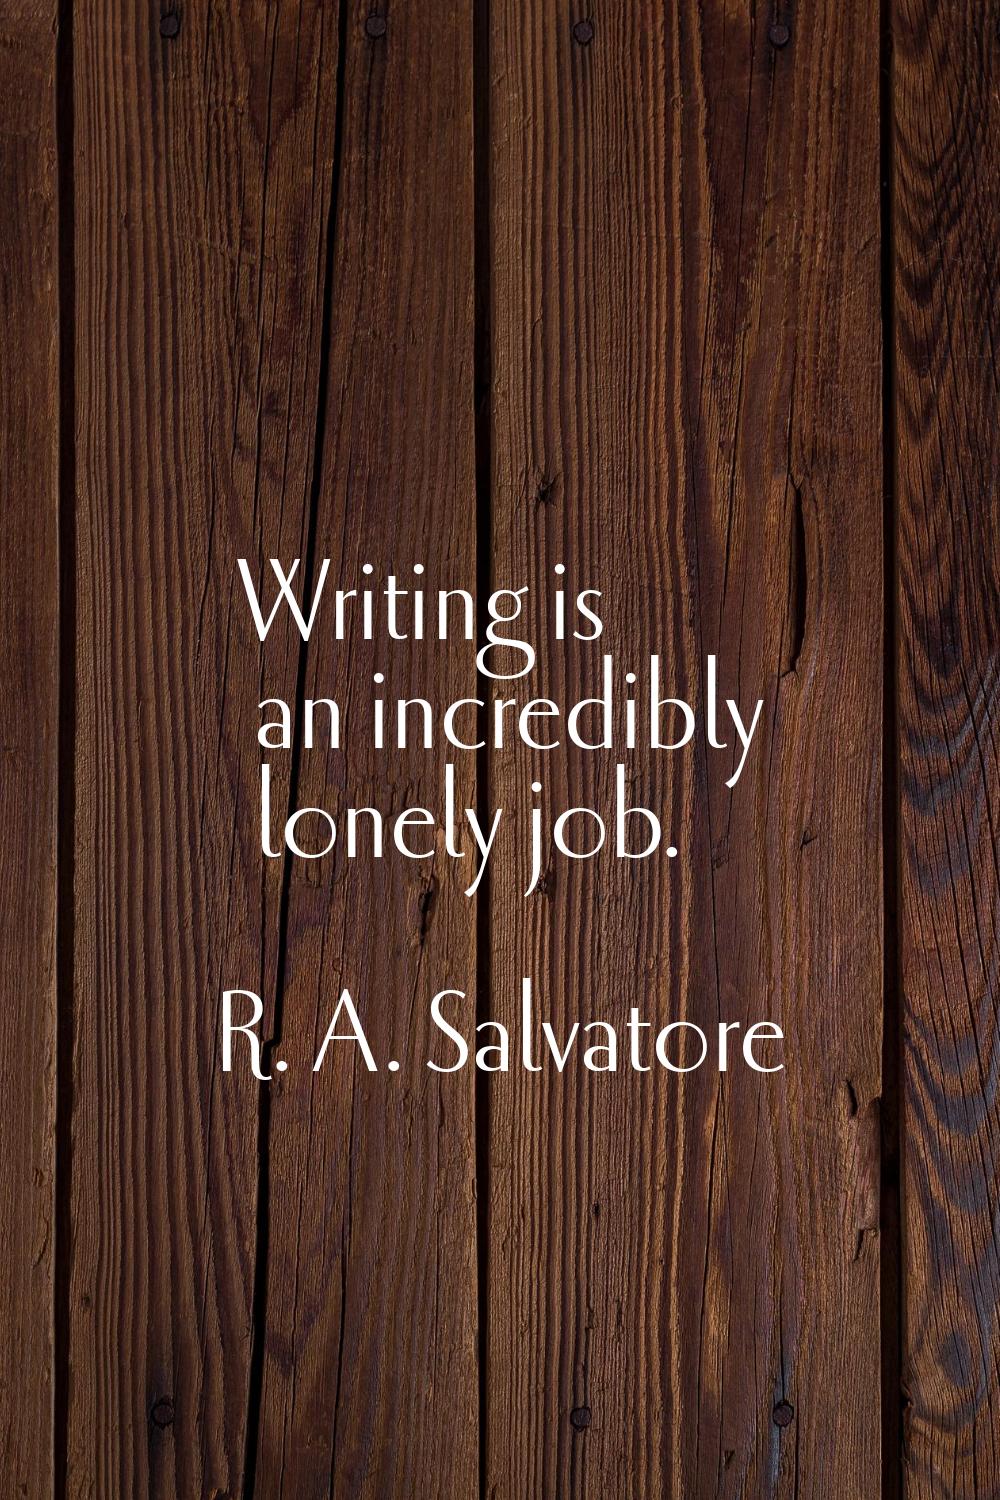 Writing is an incredibly lonely job.